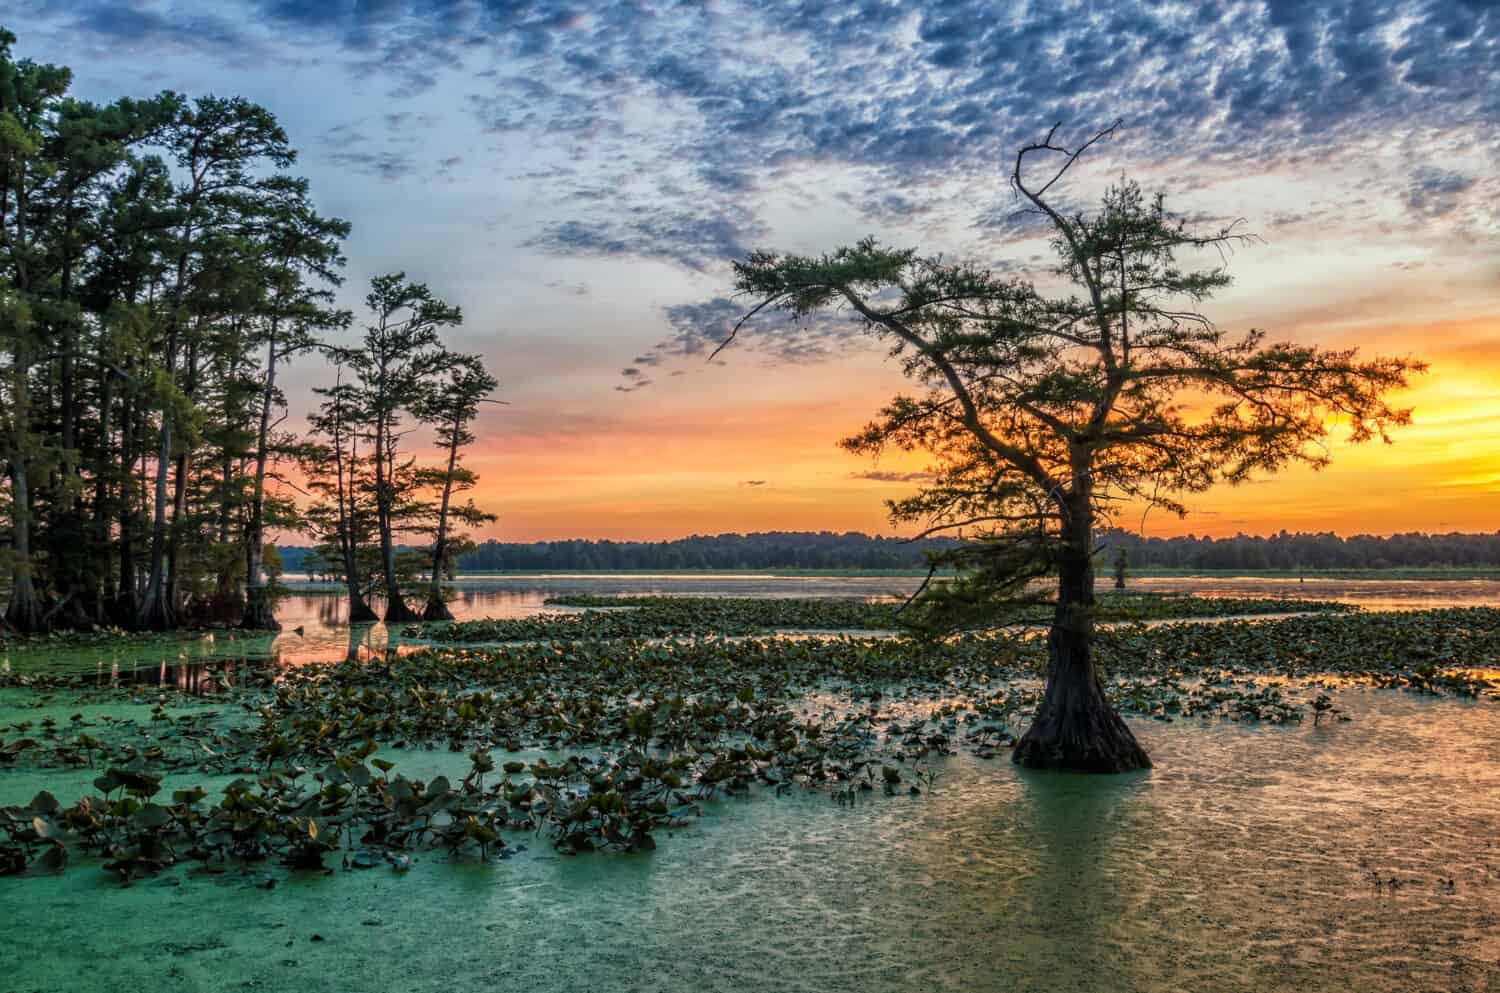 Sunset over Bald Cypress from Grassy Island on Reelfoot Lake National Wildlife Refuge in Tennessee.